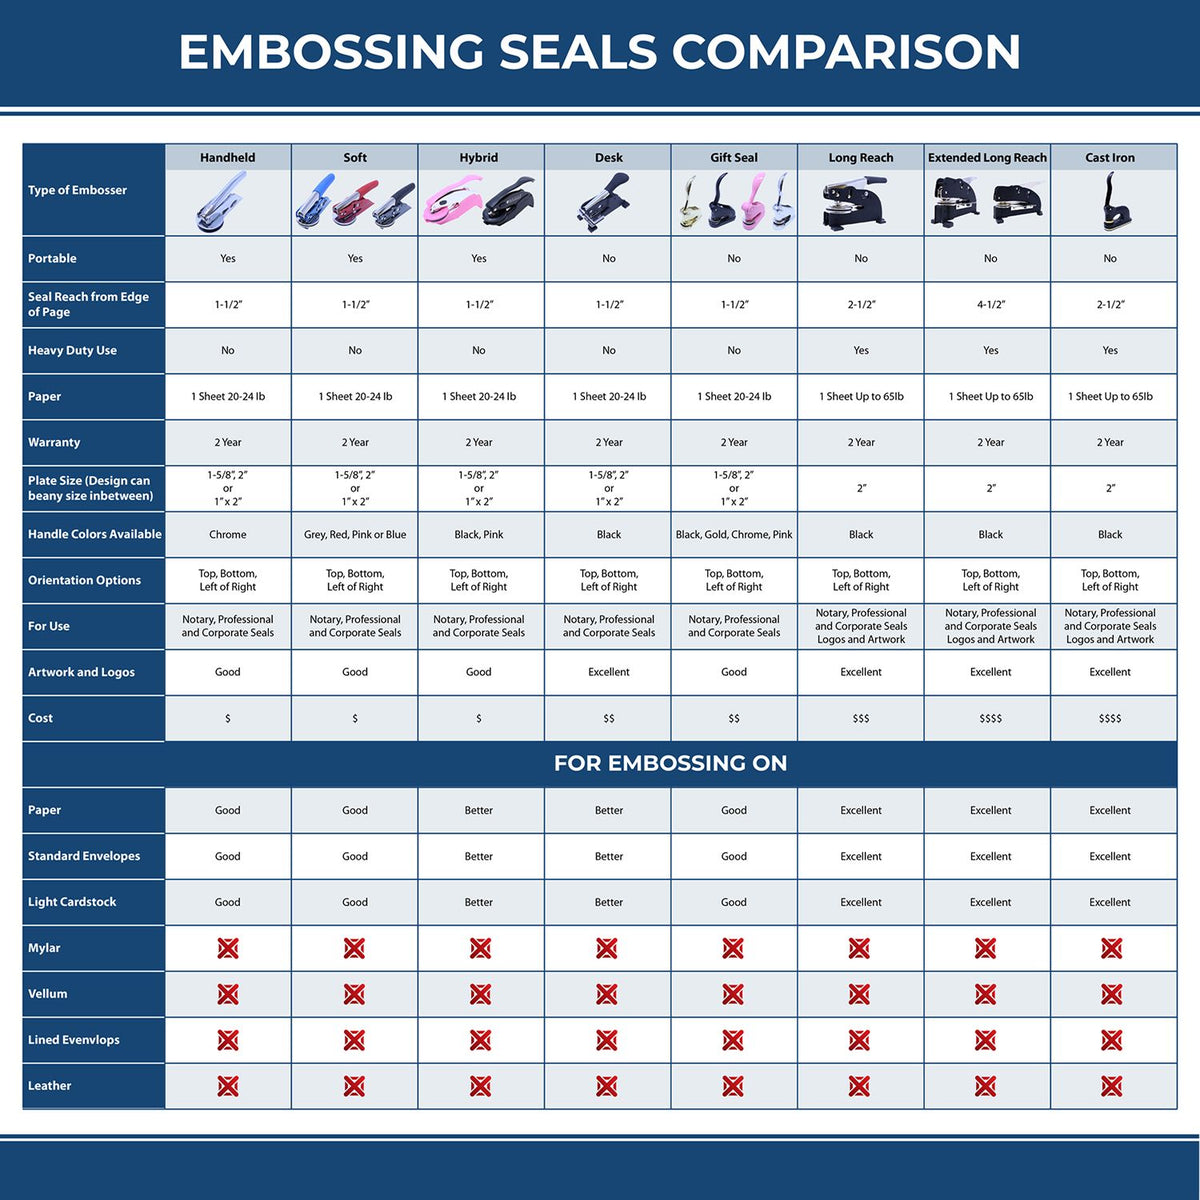 A comparison chart for the different types of mount models available for the Handheld Wyoming Professional Engineer Embosser.